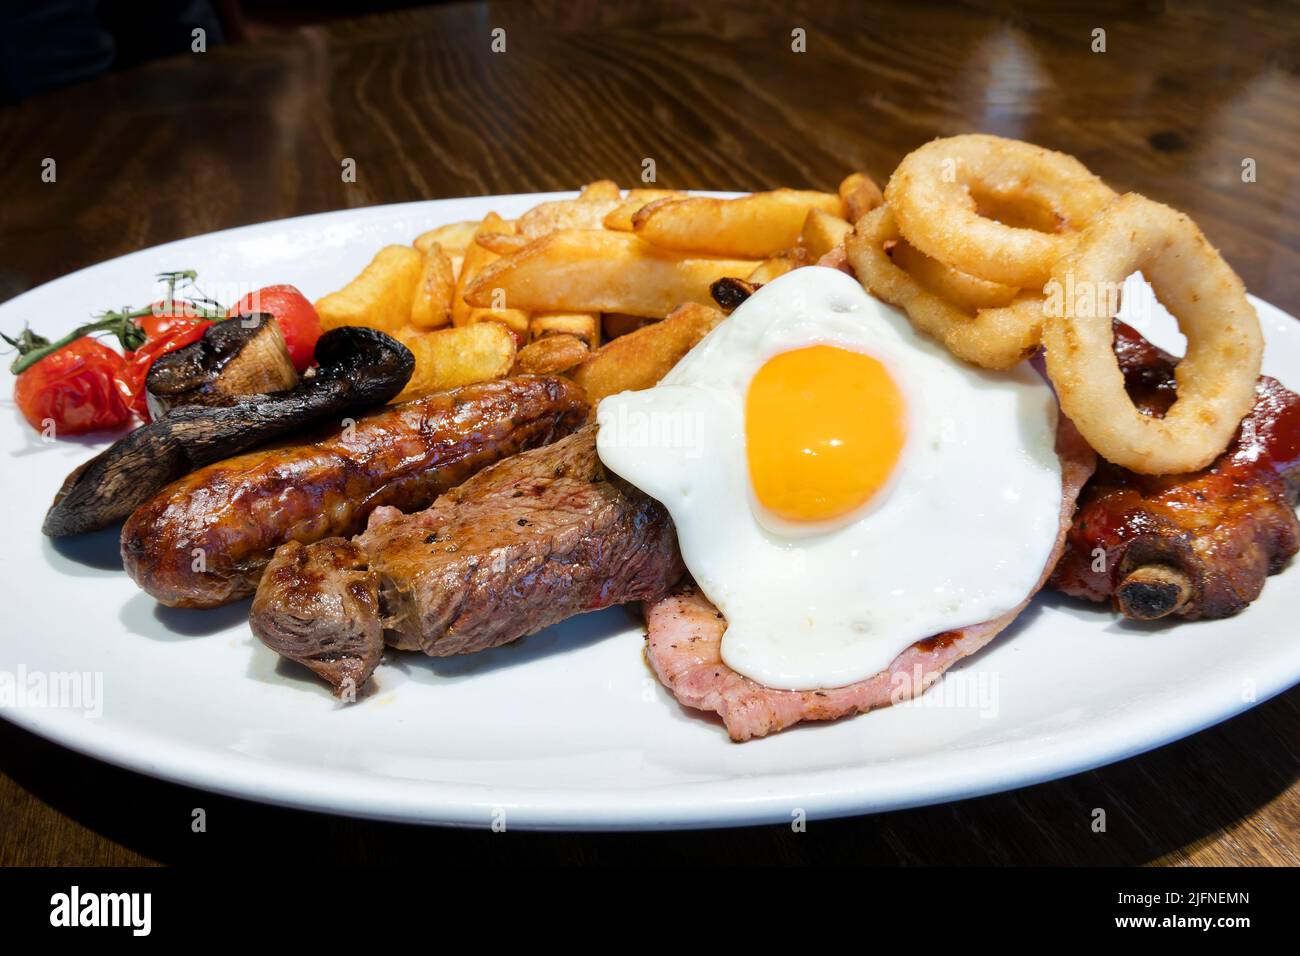 A traditional English mixed grill. A British pub meal classic. The plate contains four different grilled meats, a fried egg, chips, fried onion rings Stock Photo